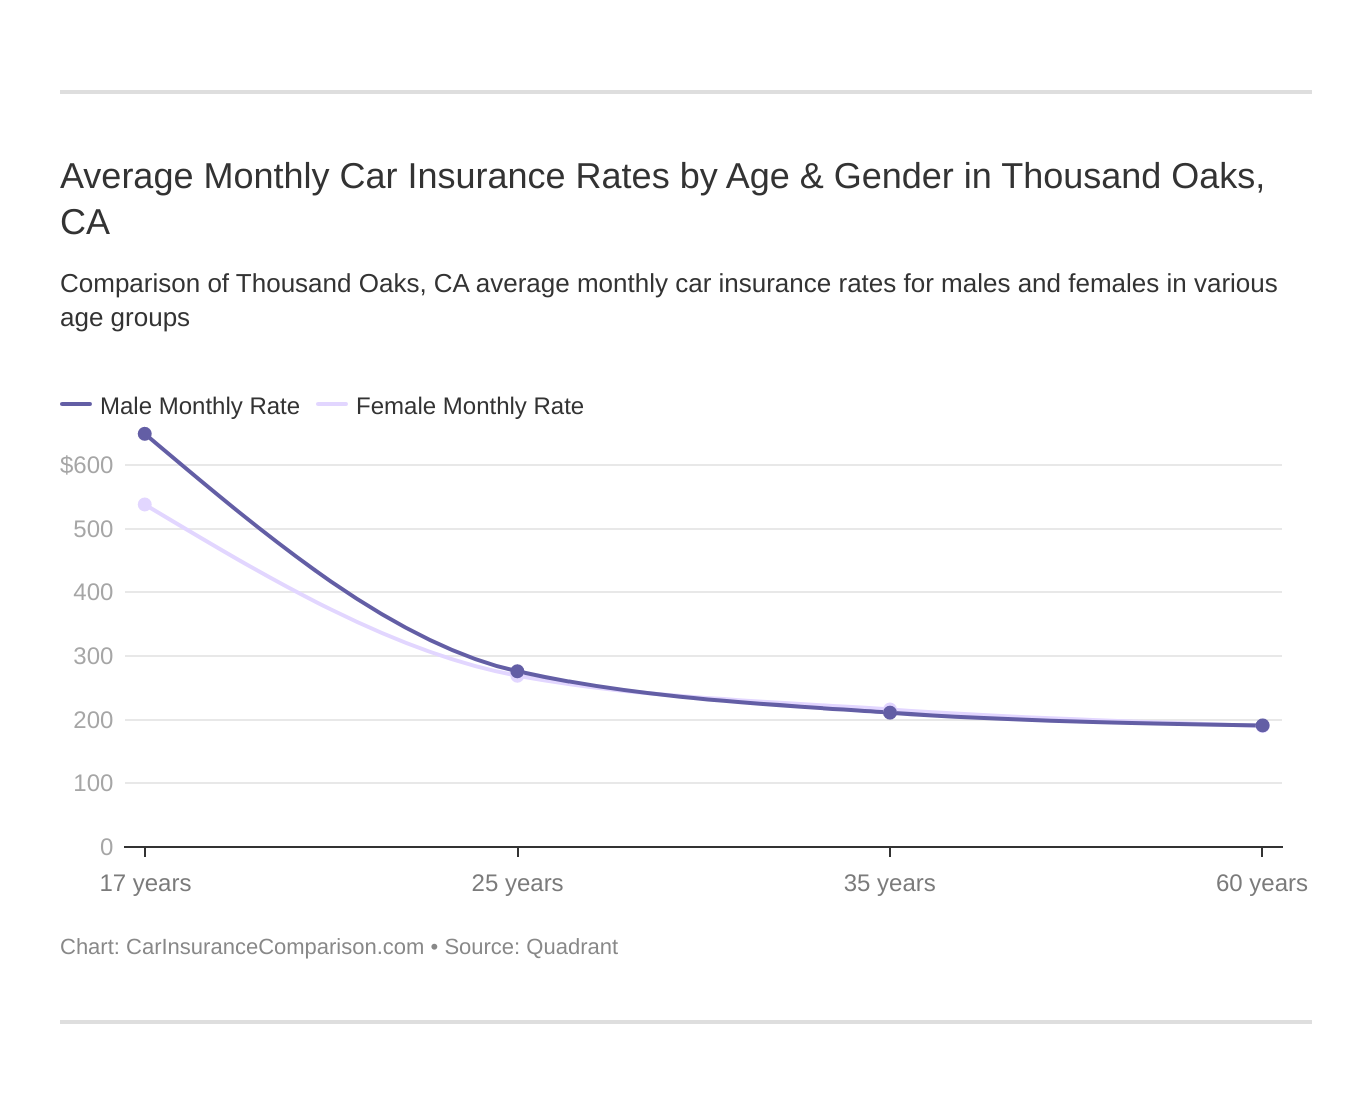 Average Monthly Car Insurance Rates by Age & Gender in Thousand Oaks, CA